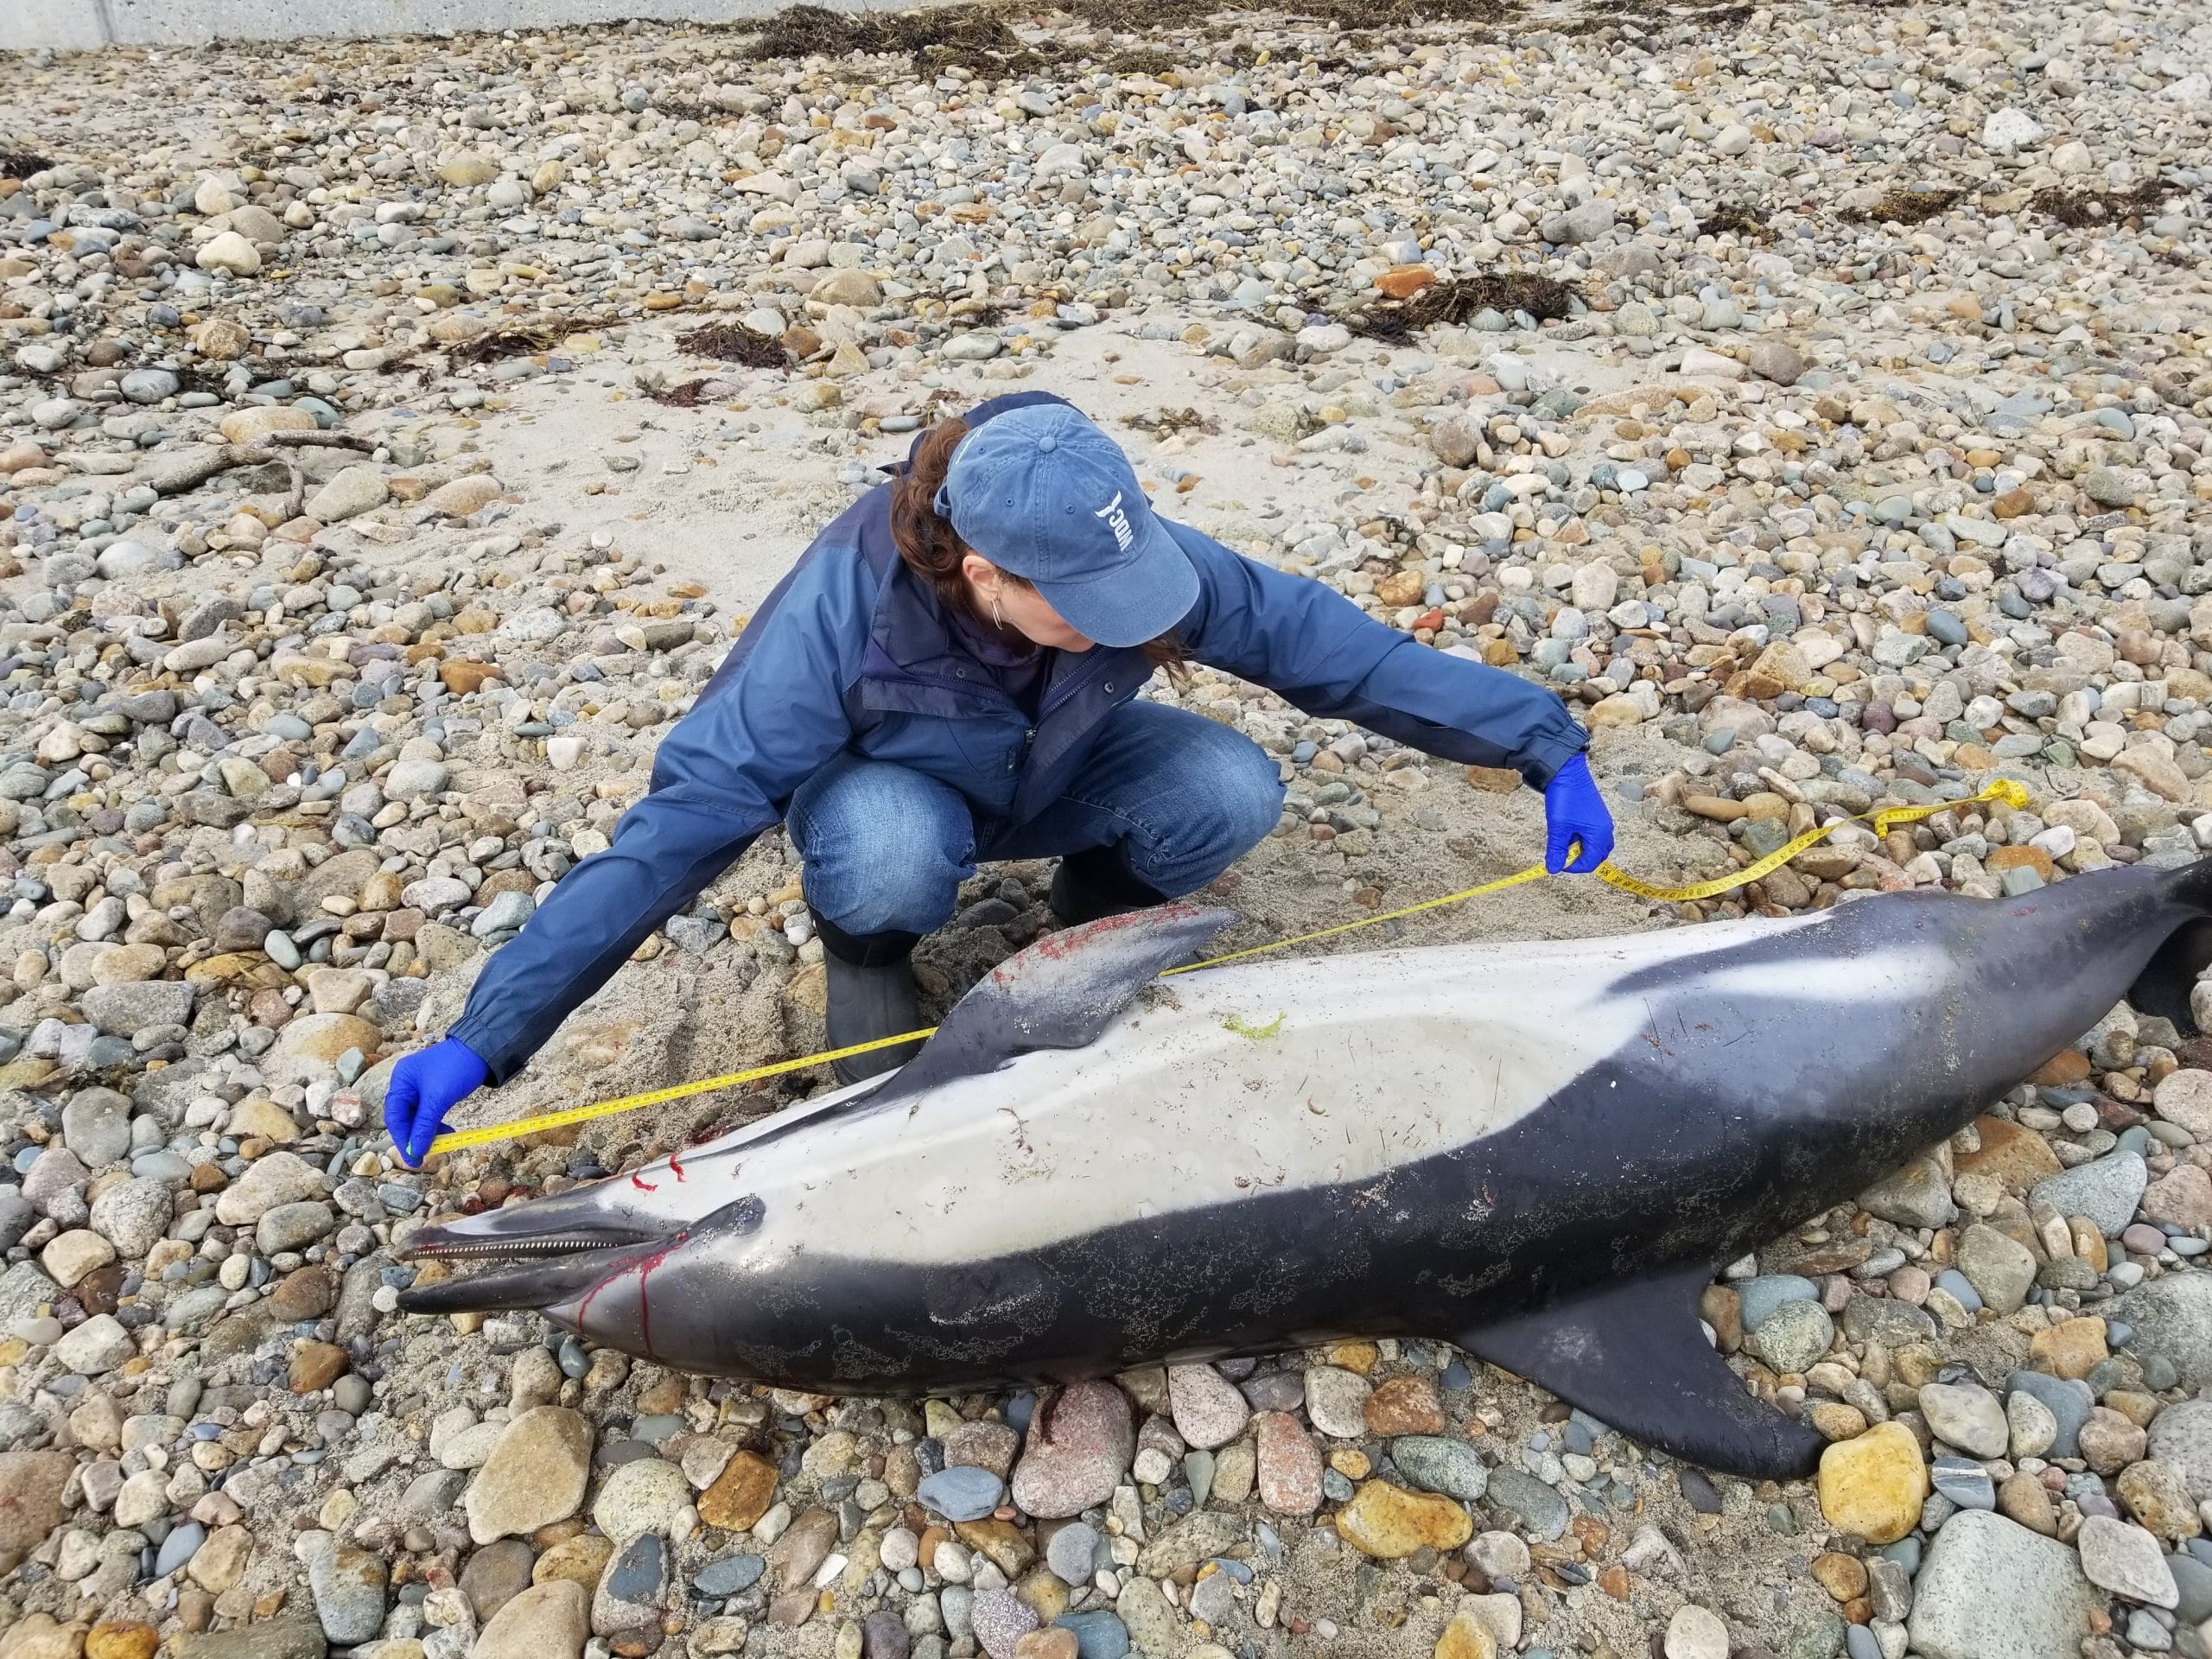 Asmutis-Silvia gathers data on a deceased common dolphin in Duxbury. (WDC)